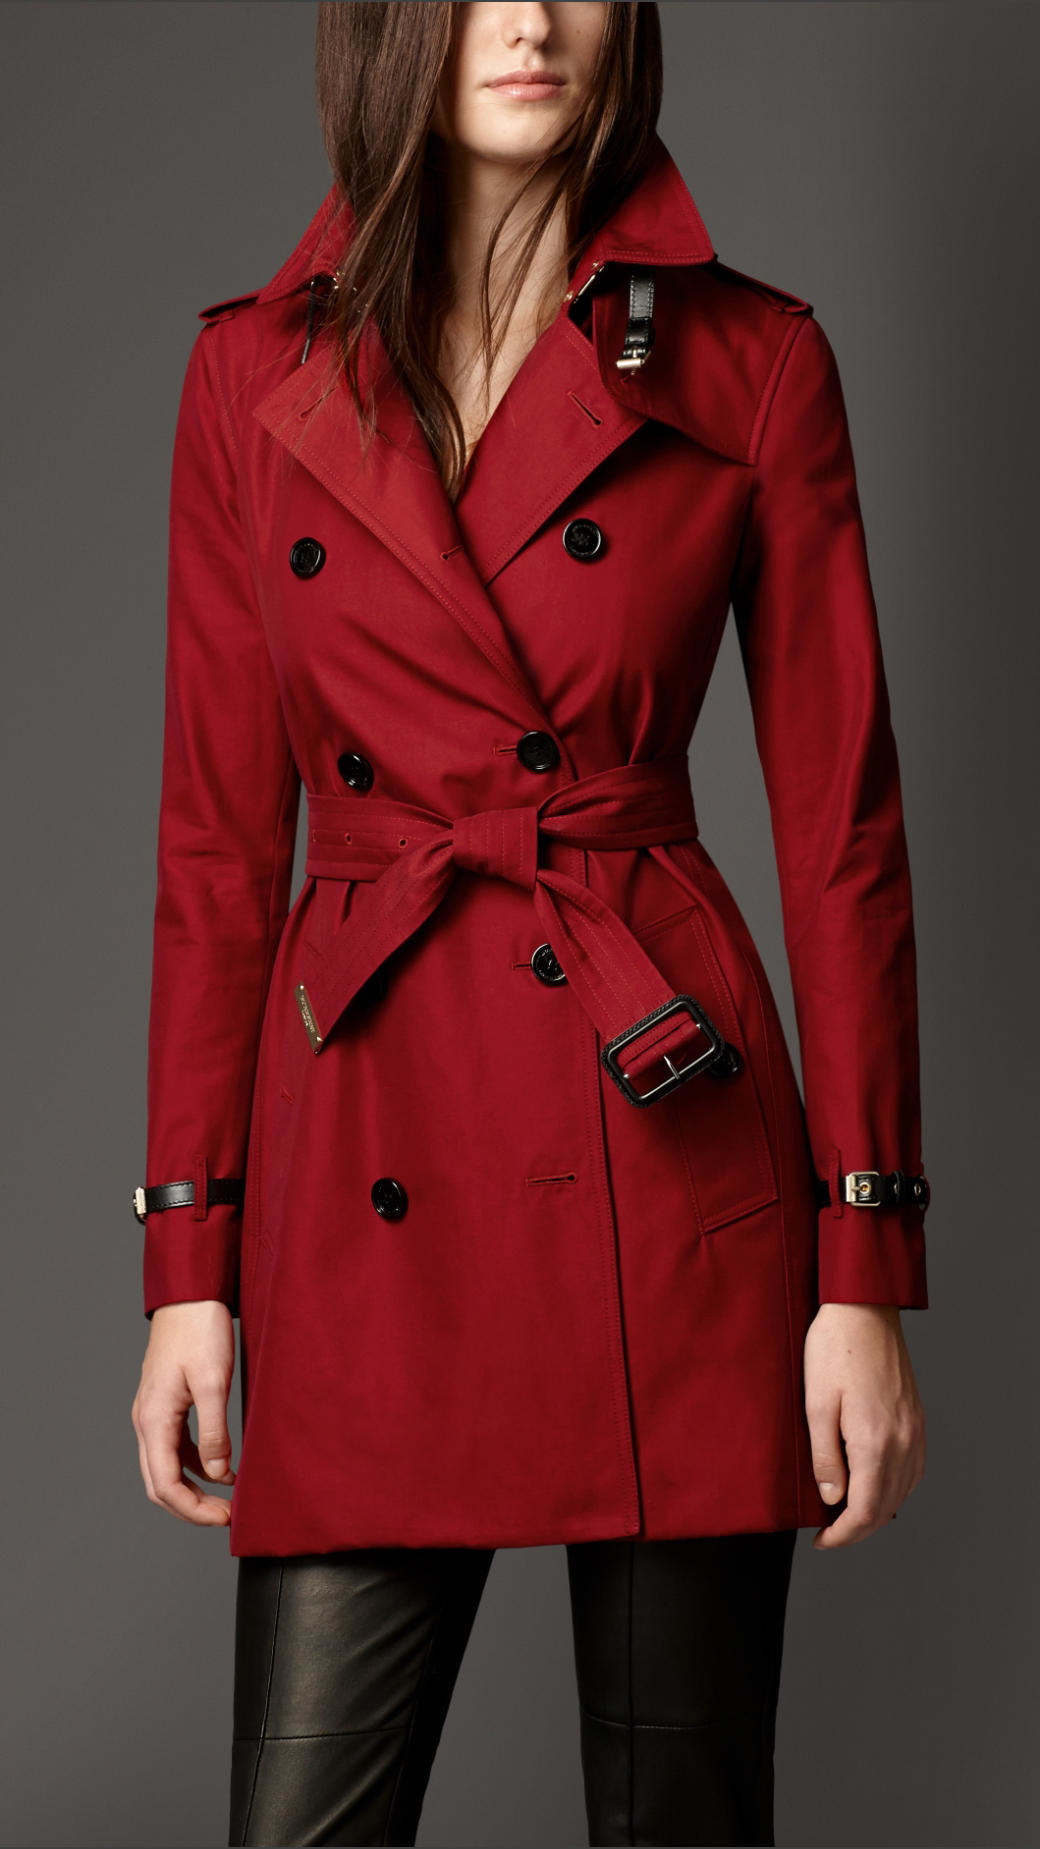 Lyst - Burberry Leather Detail Cotton Gabardine Trench Coat in Red